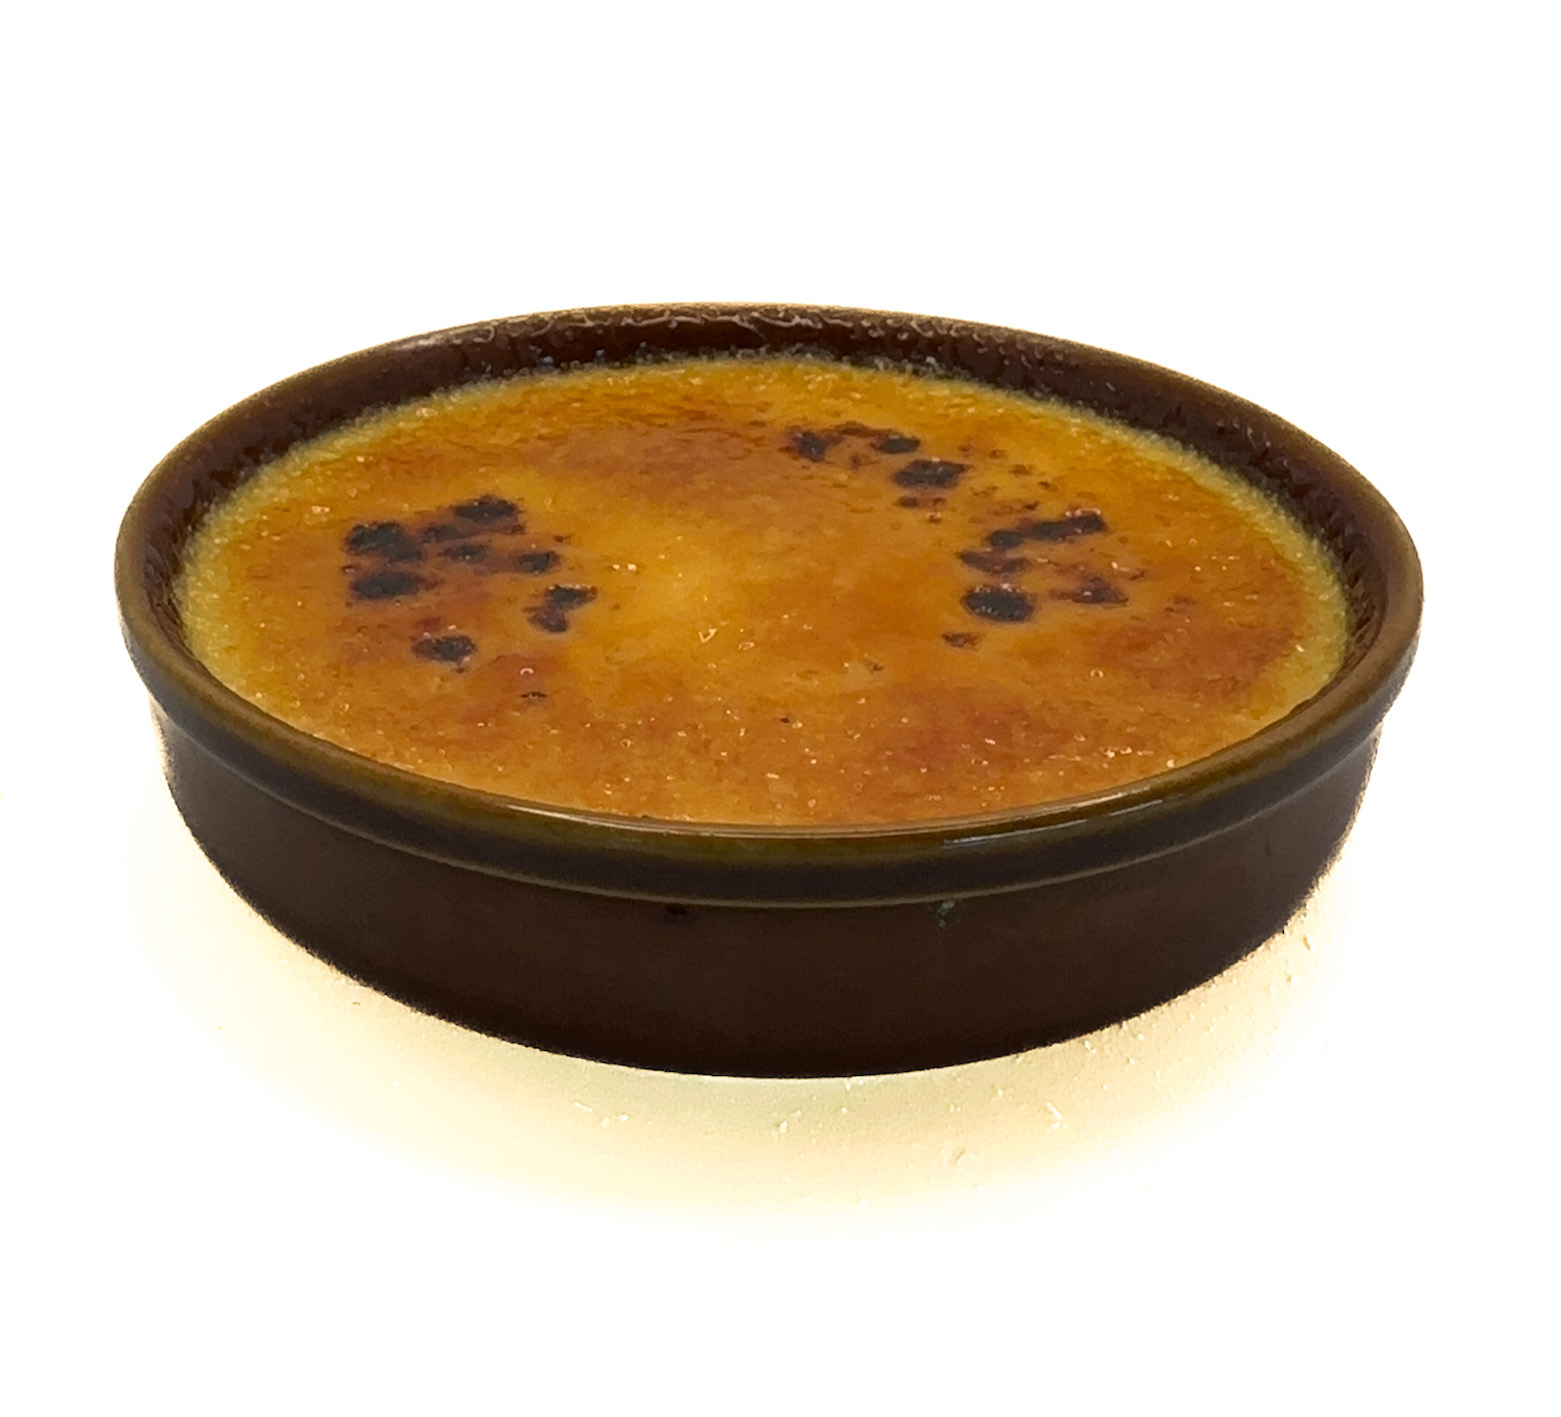 Passionsfrucht creme brulee